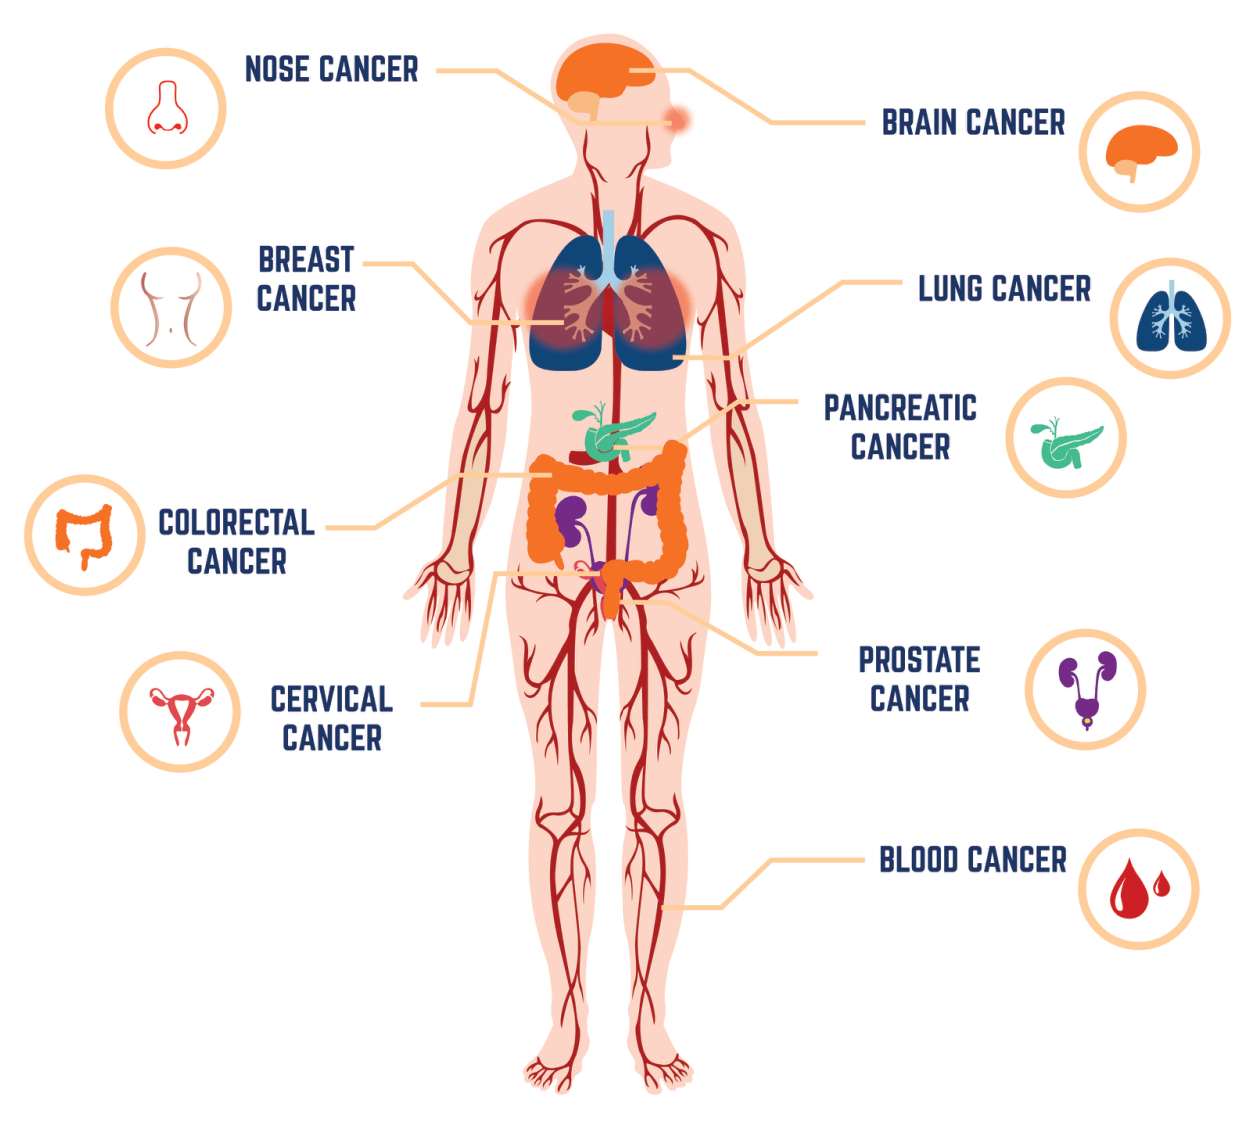 various types of cancer cells, including breast, lung, prostate, and blood cancer